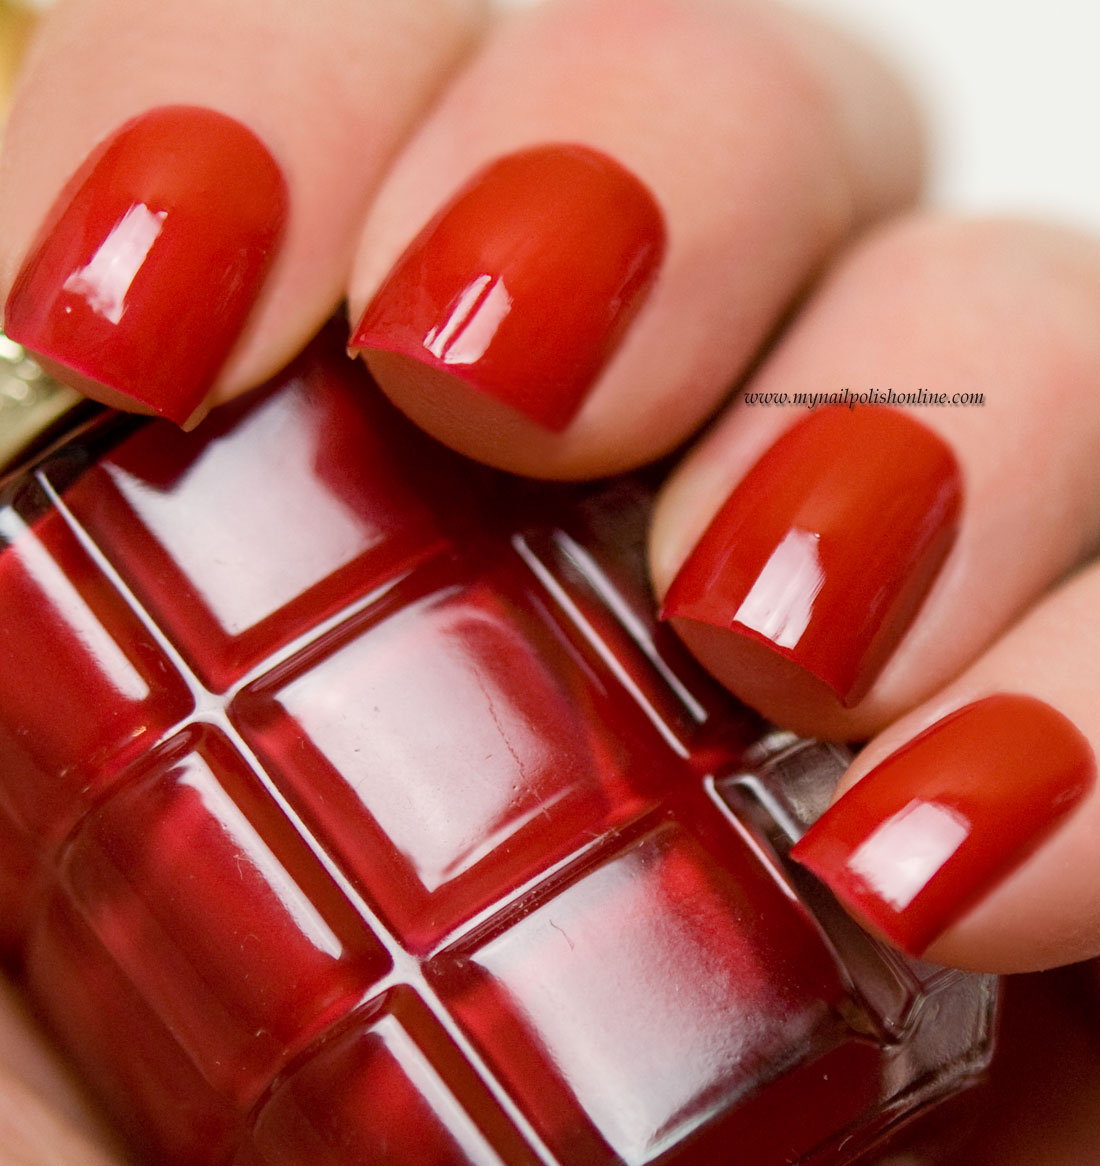 L'Oreal - Rouge Amour - My Nail Polish Online